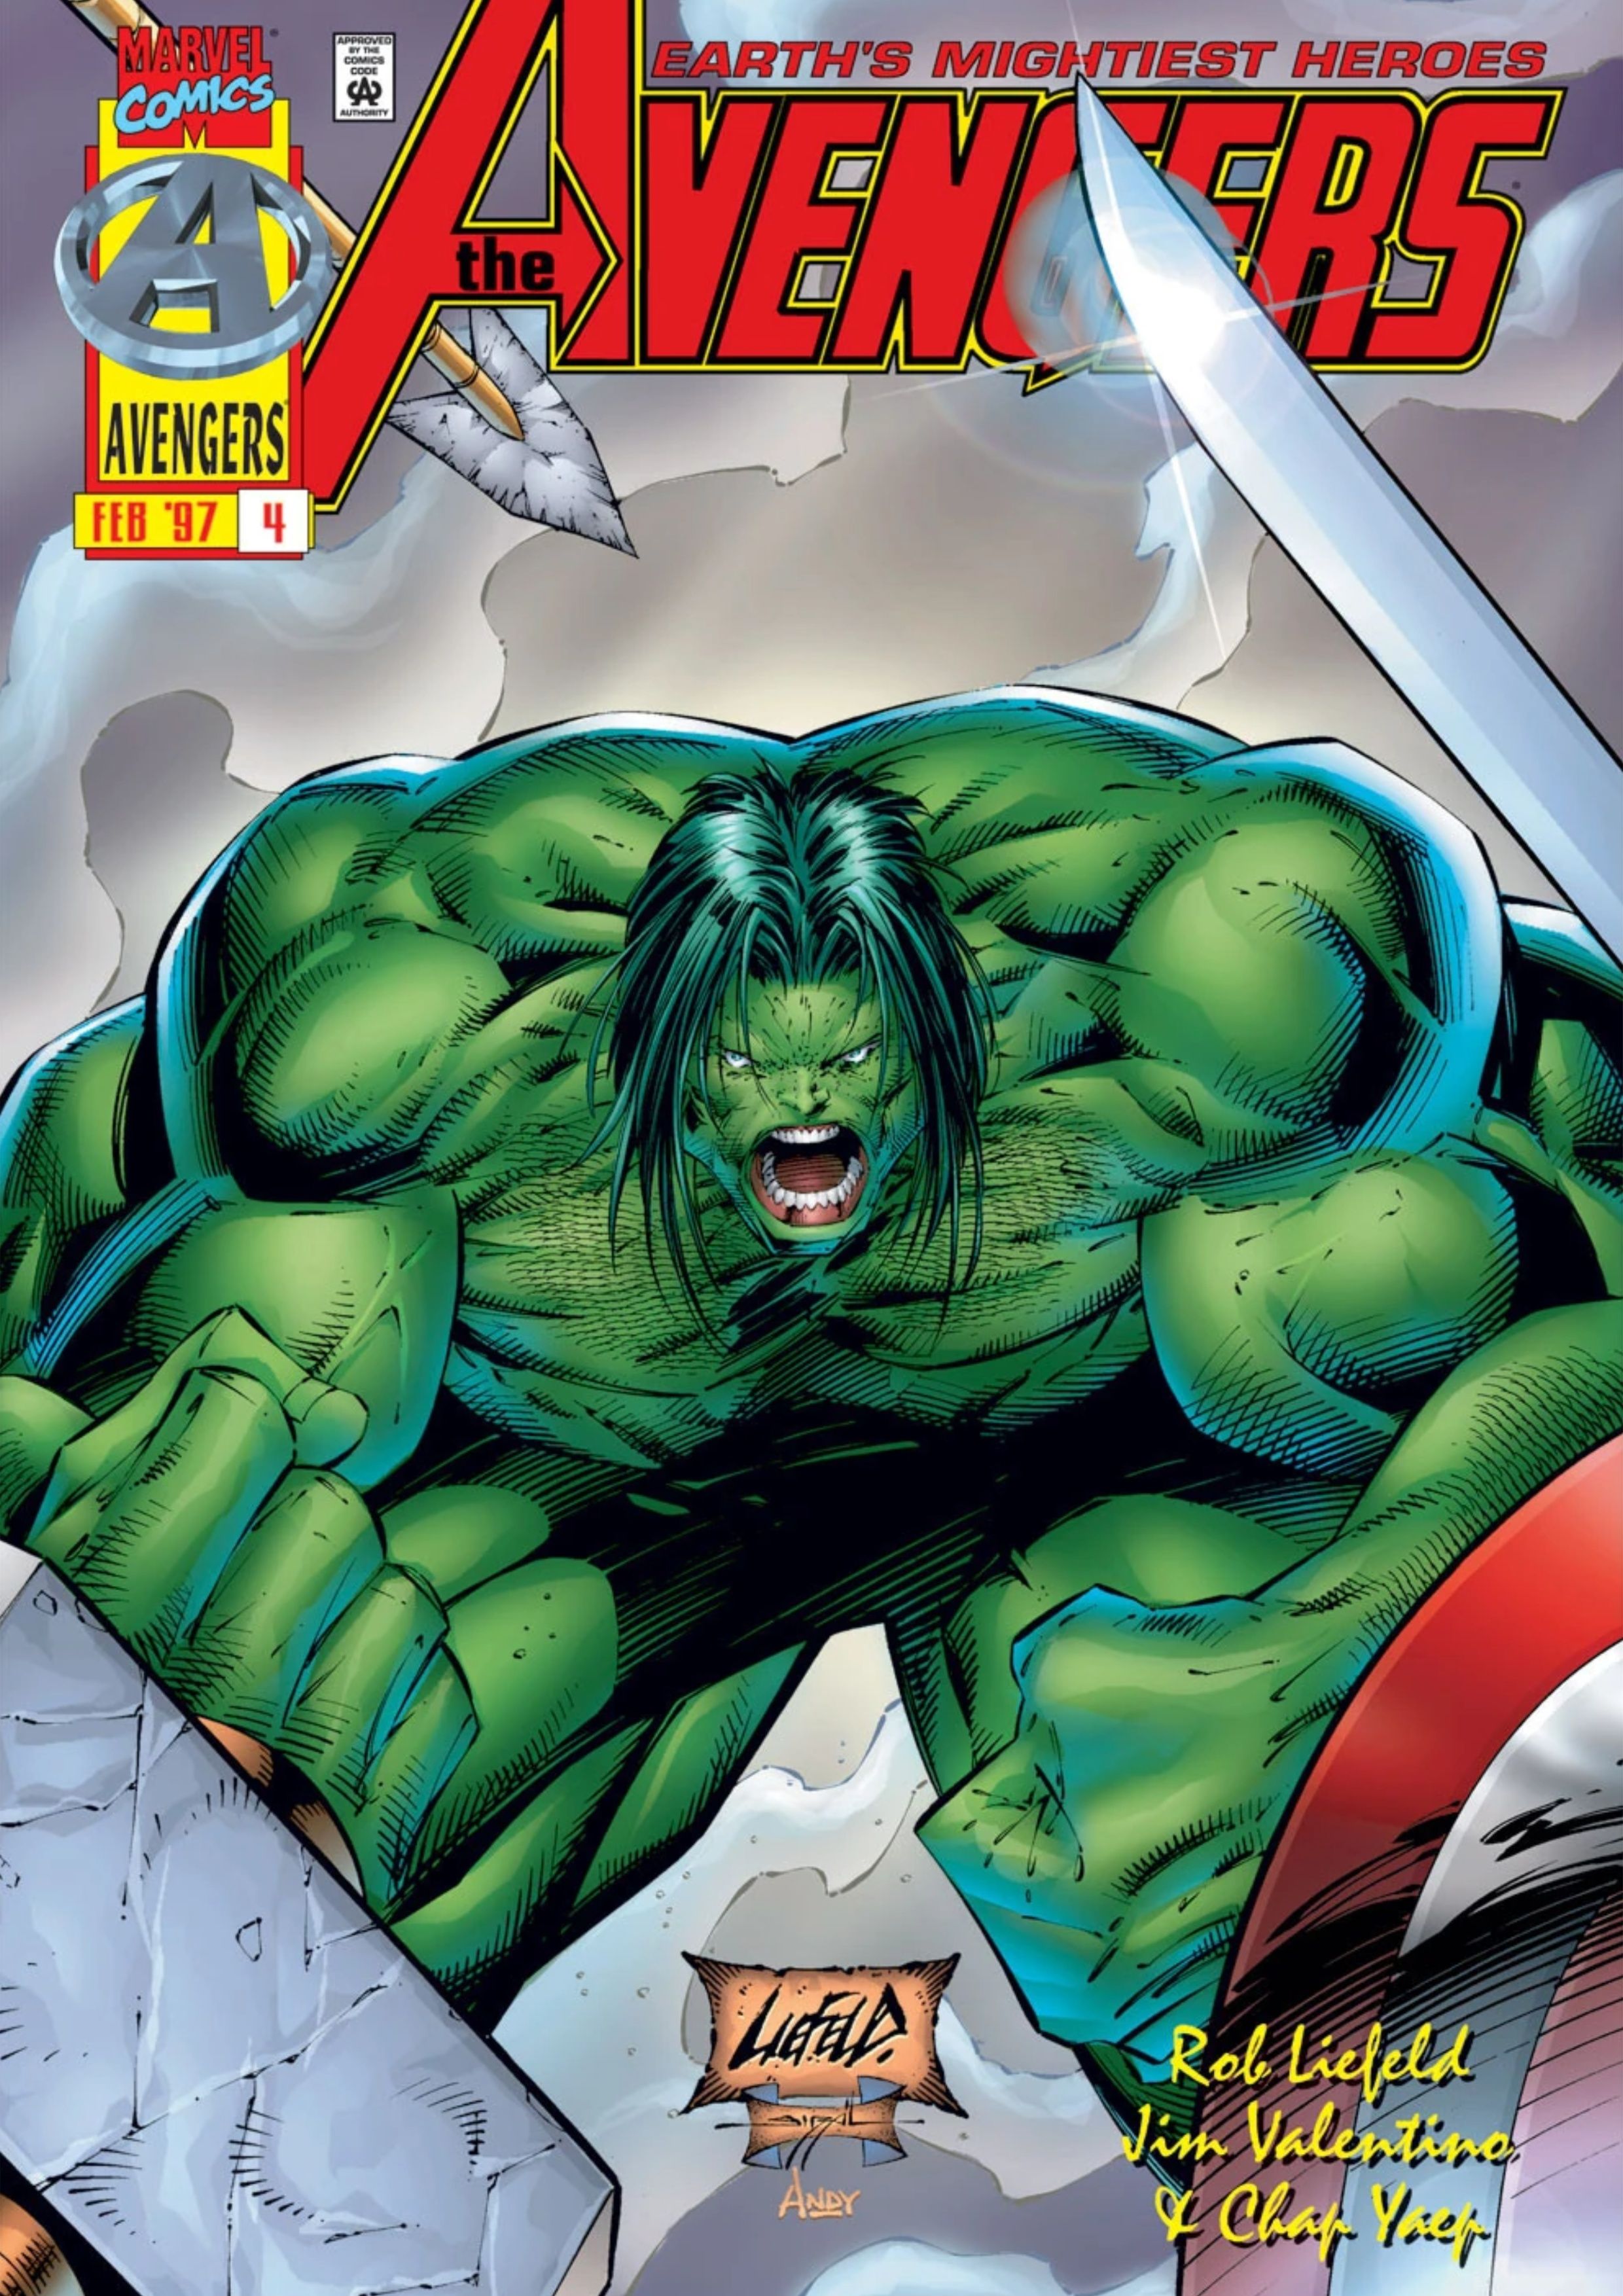 Hulk flexing in a Rob Liefeld cover for Avengers.